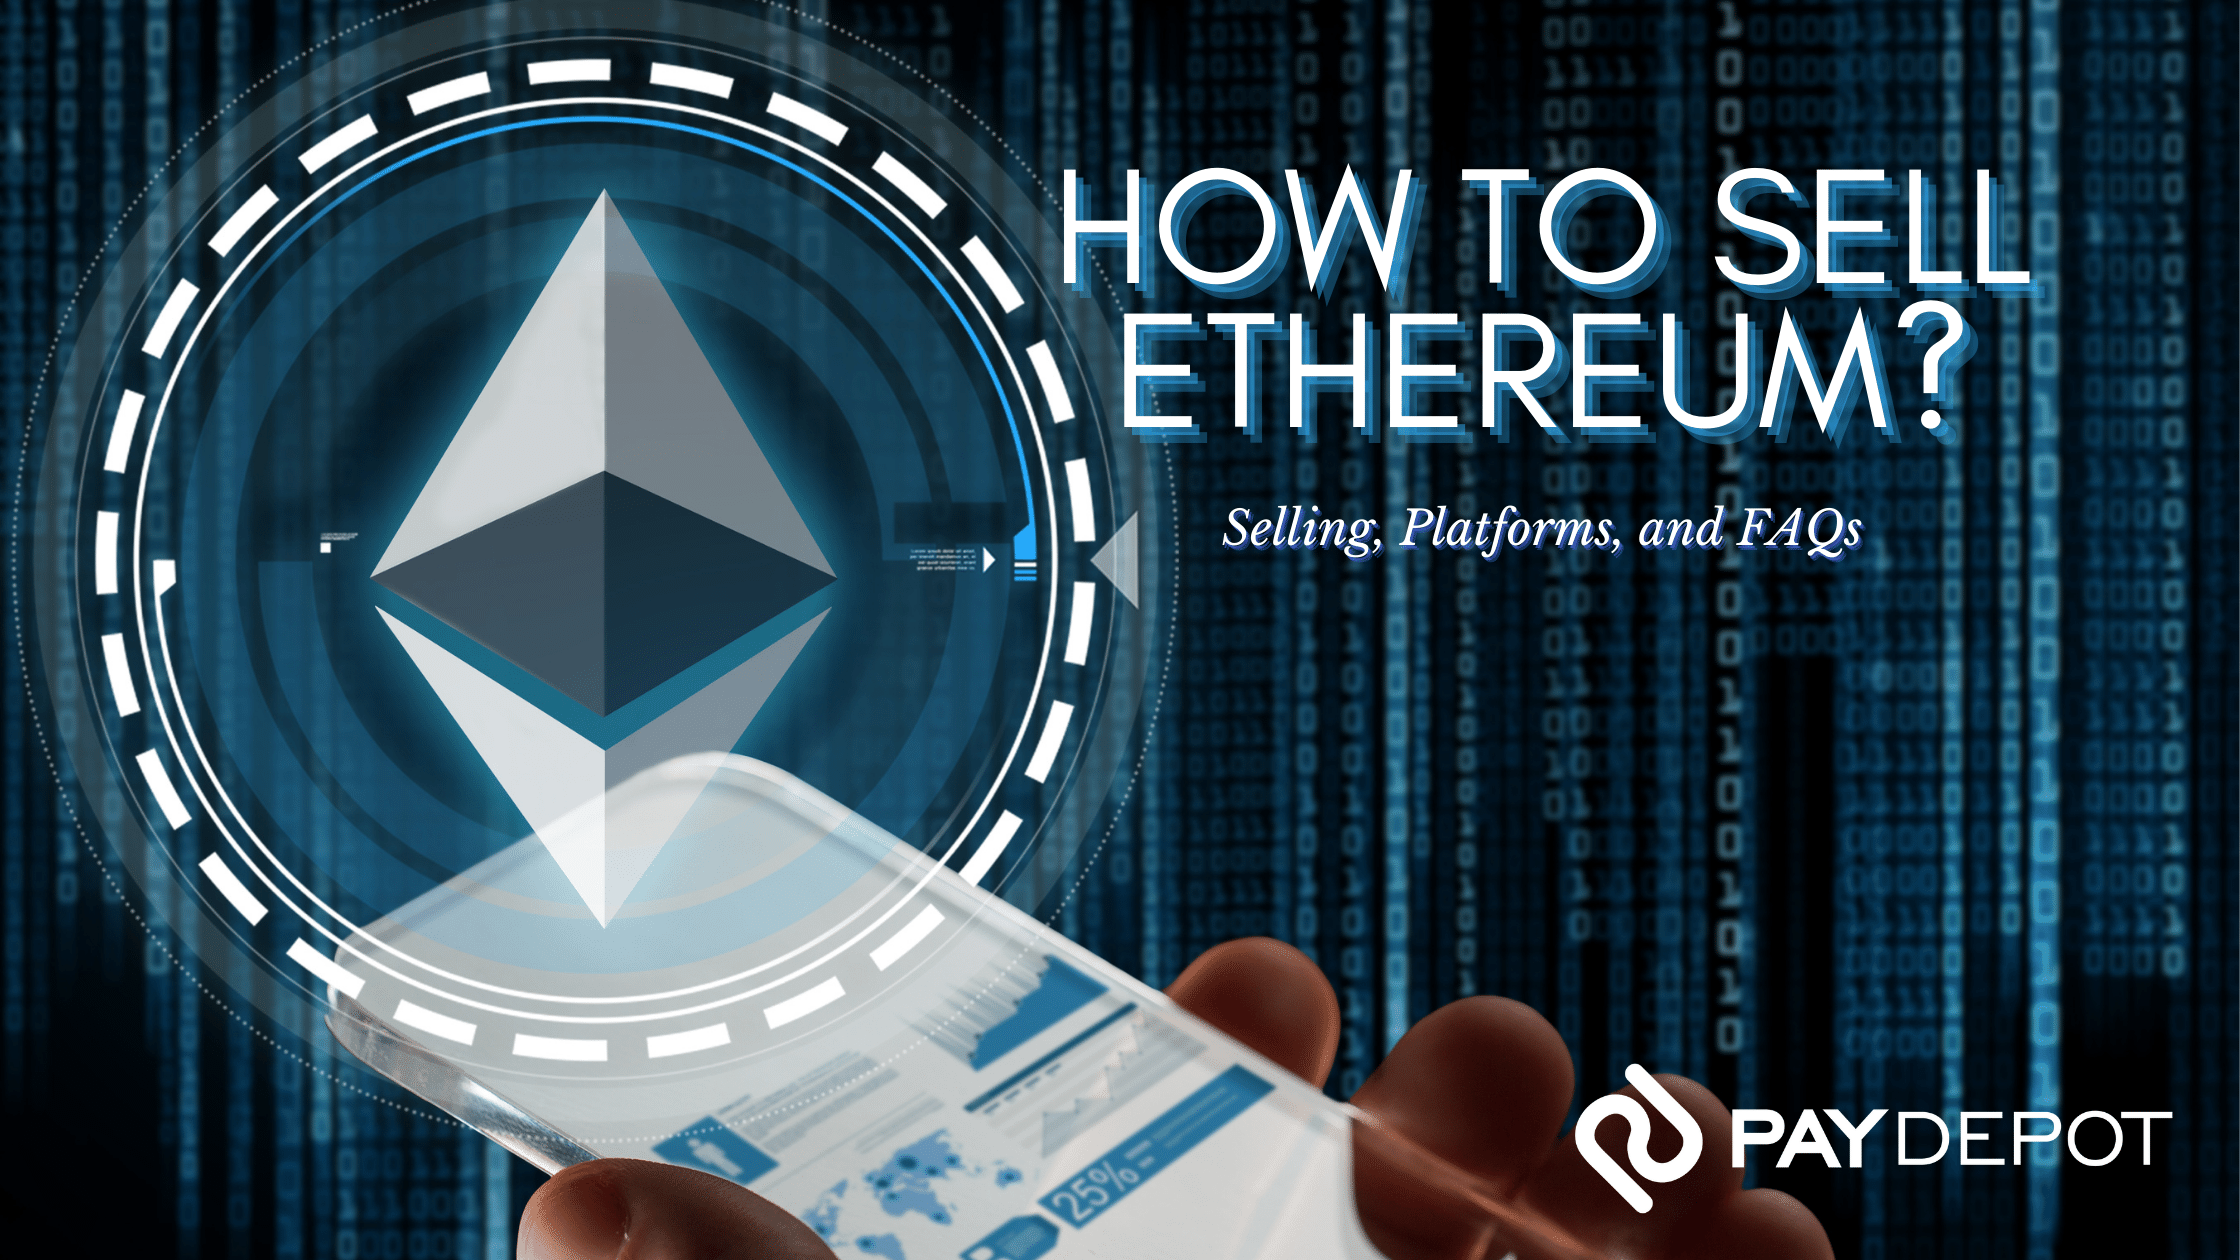 How to sell mined ethereum bitcoins